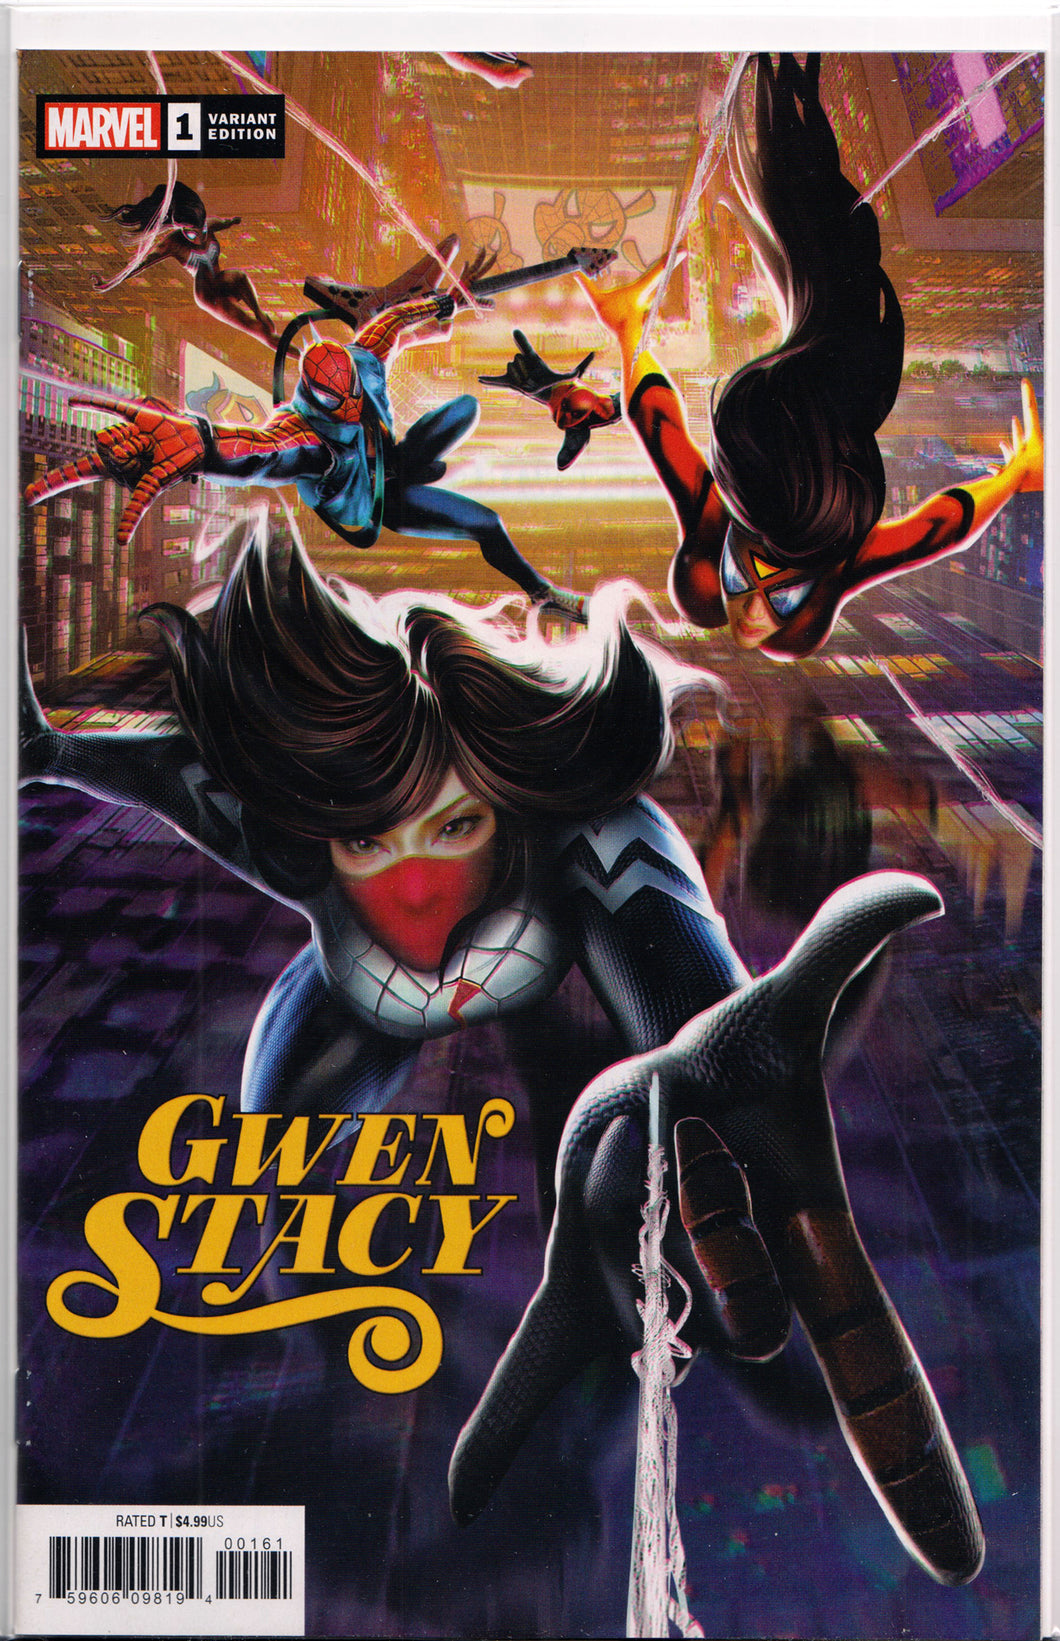 GWEN STACY #1 (JIE YUAN CONNECTING VARIANT) COMIC BOOK ~ Marvel Comics